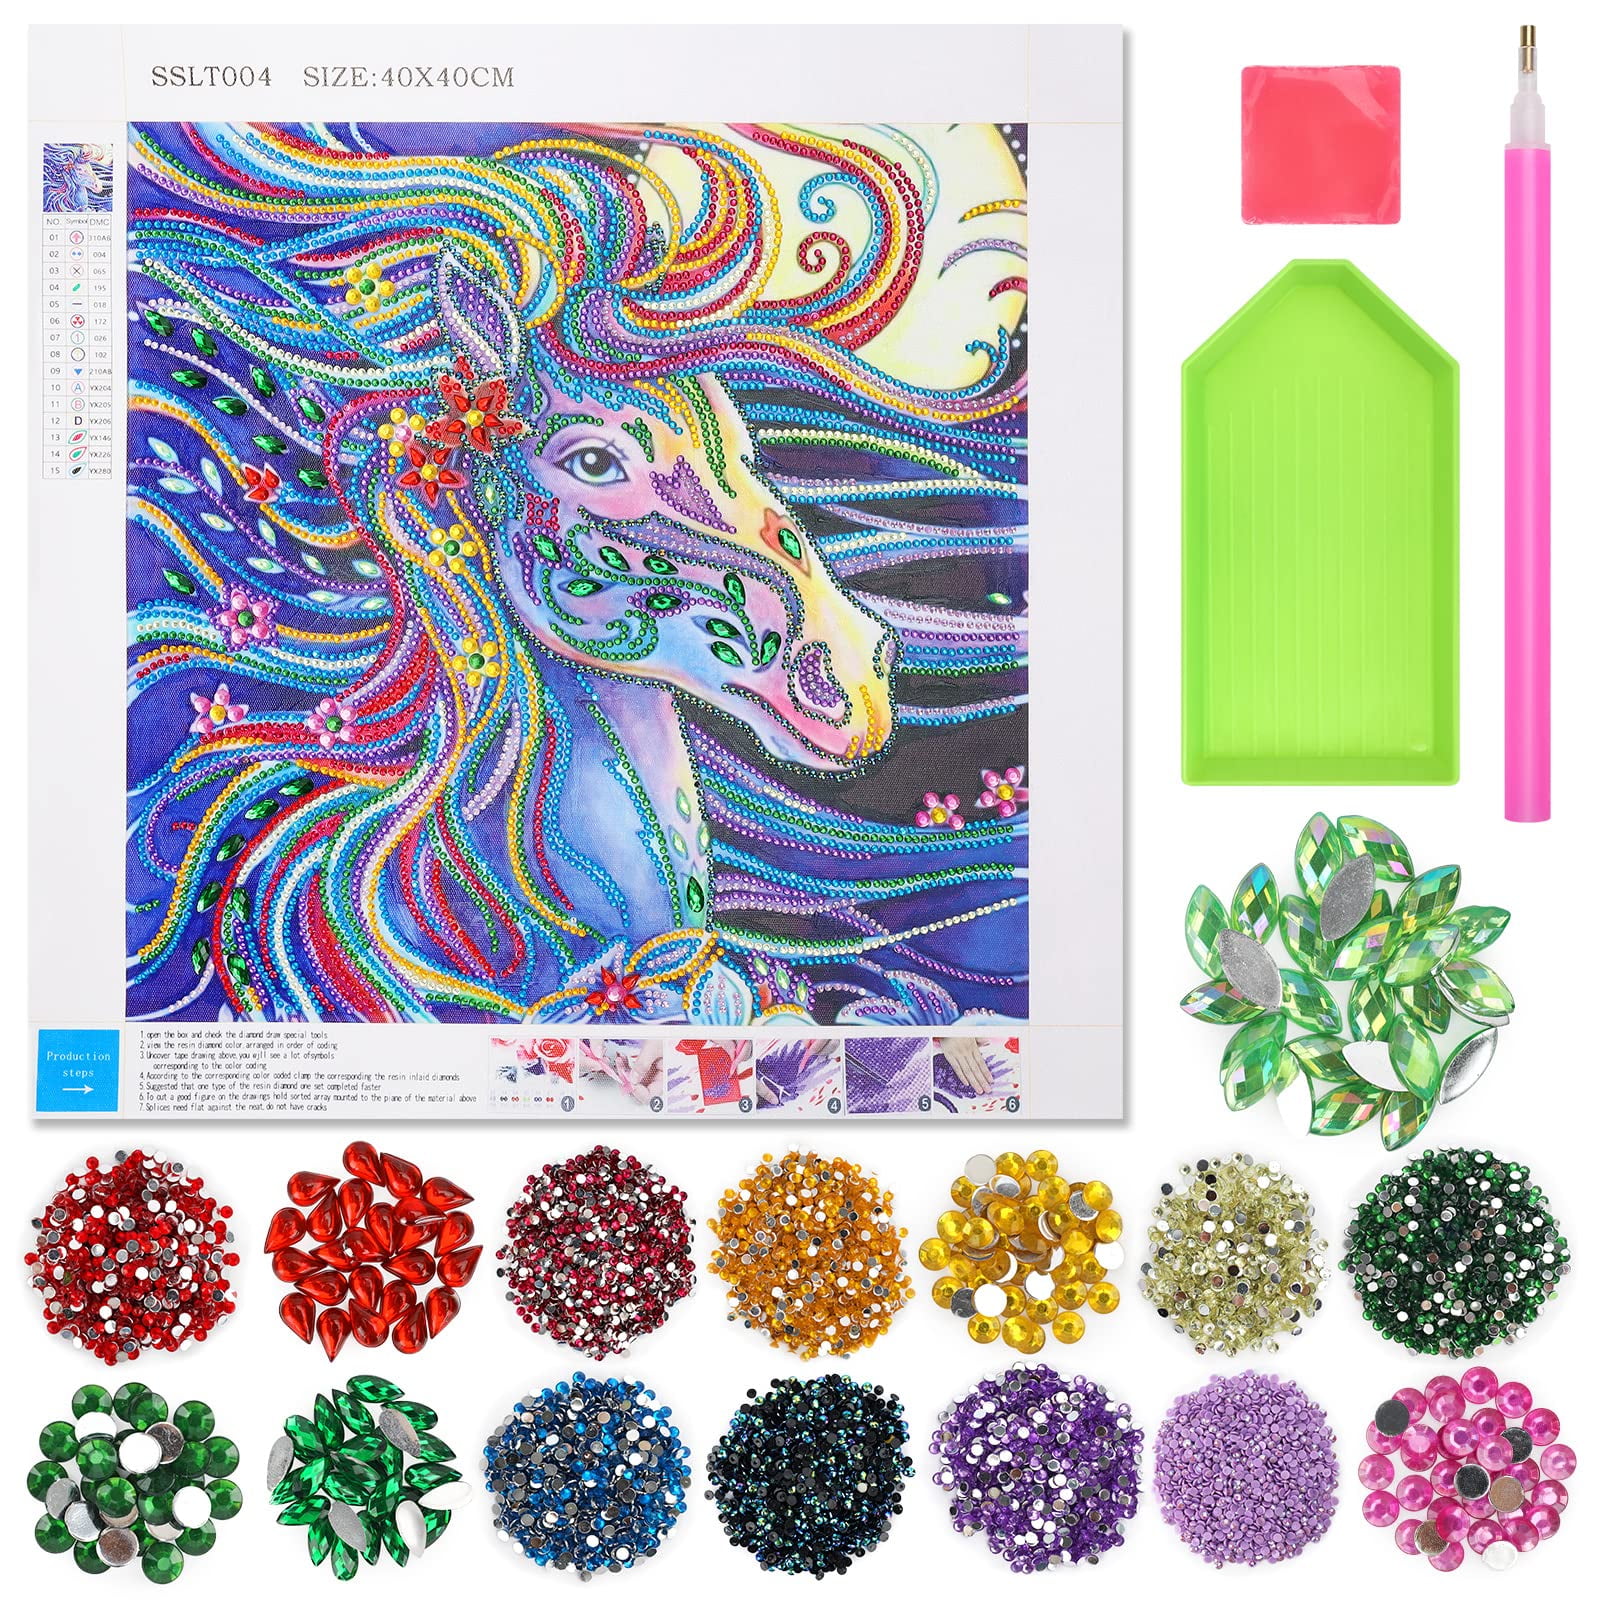 Dream Fun 5D Diamond Art Kits for Kids Age 9 10 11 12, 40 * 40 cm Diamond  Painting Kits Gifts for 9-15 Year Olds Girls Teenage,Toys for 8 9 10 11 12